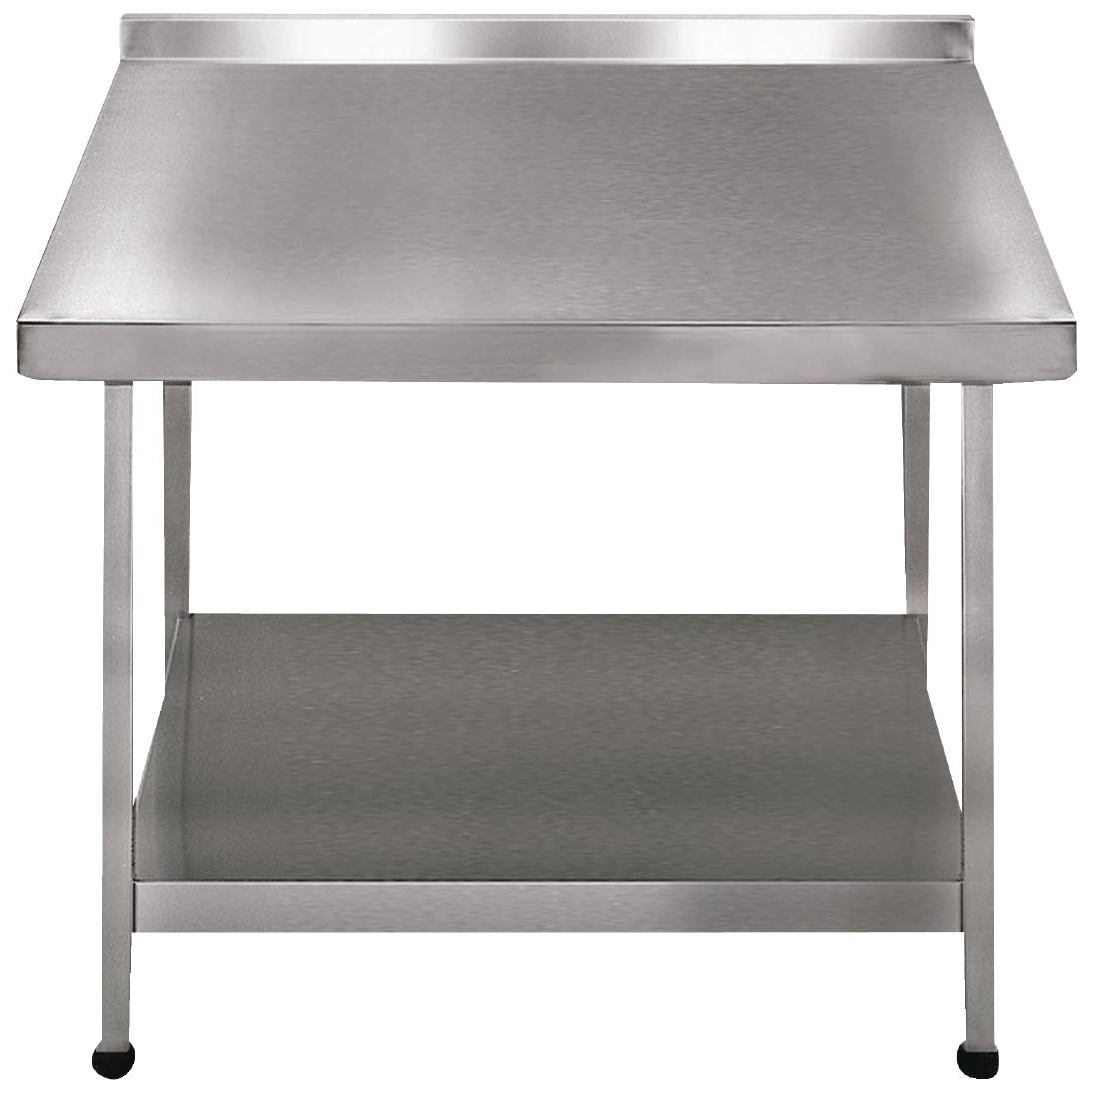 Franke Sissons Stainless Steel Wall Table with Upstand 1500x650mm